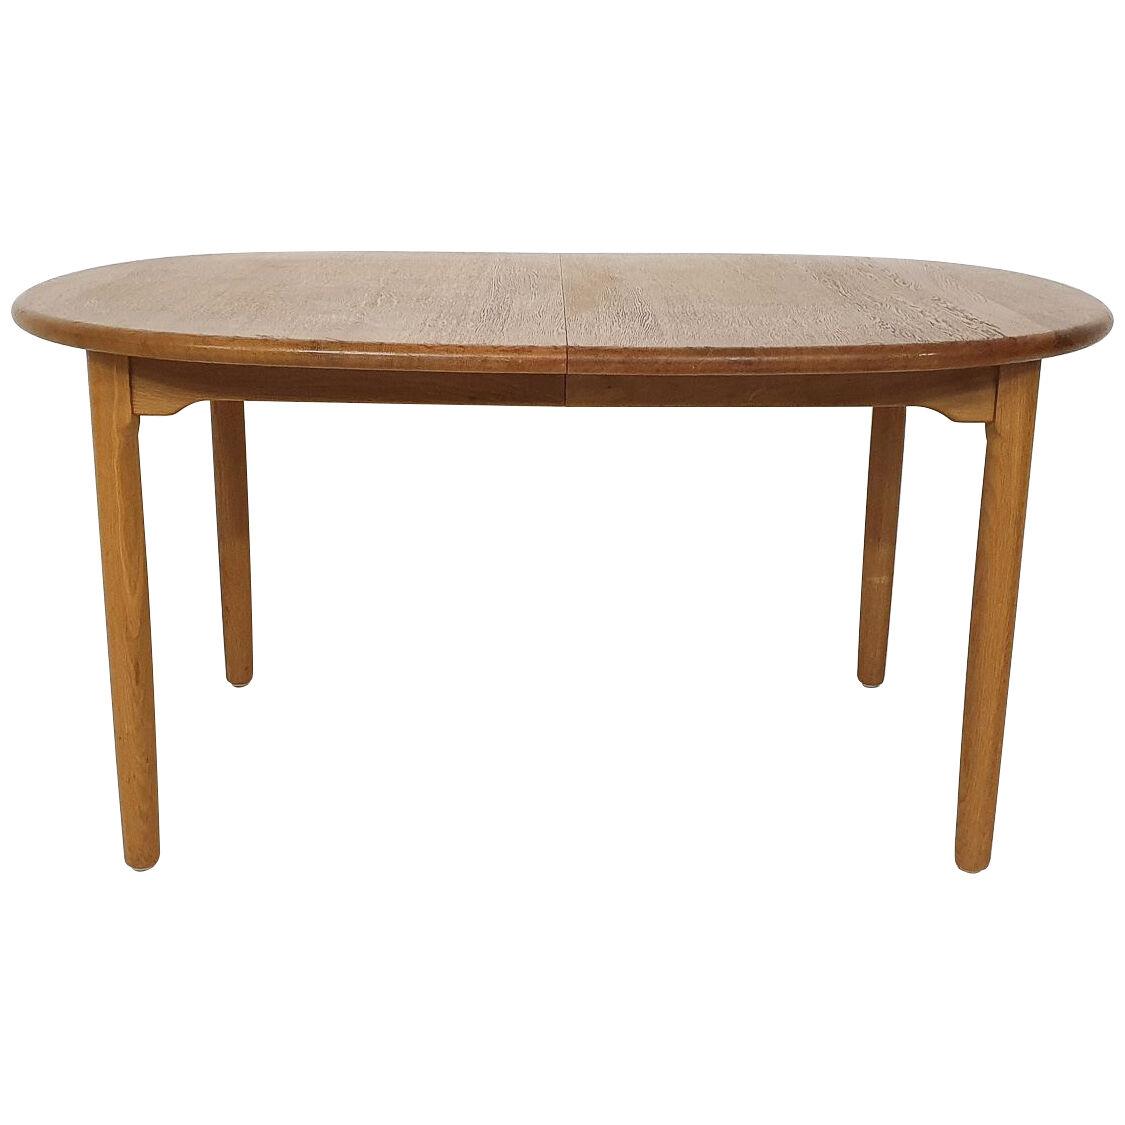 Oval dining table by Kurt Ostervig for KP Mobler, Denmark 1980's